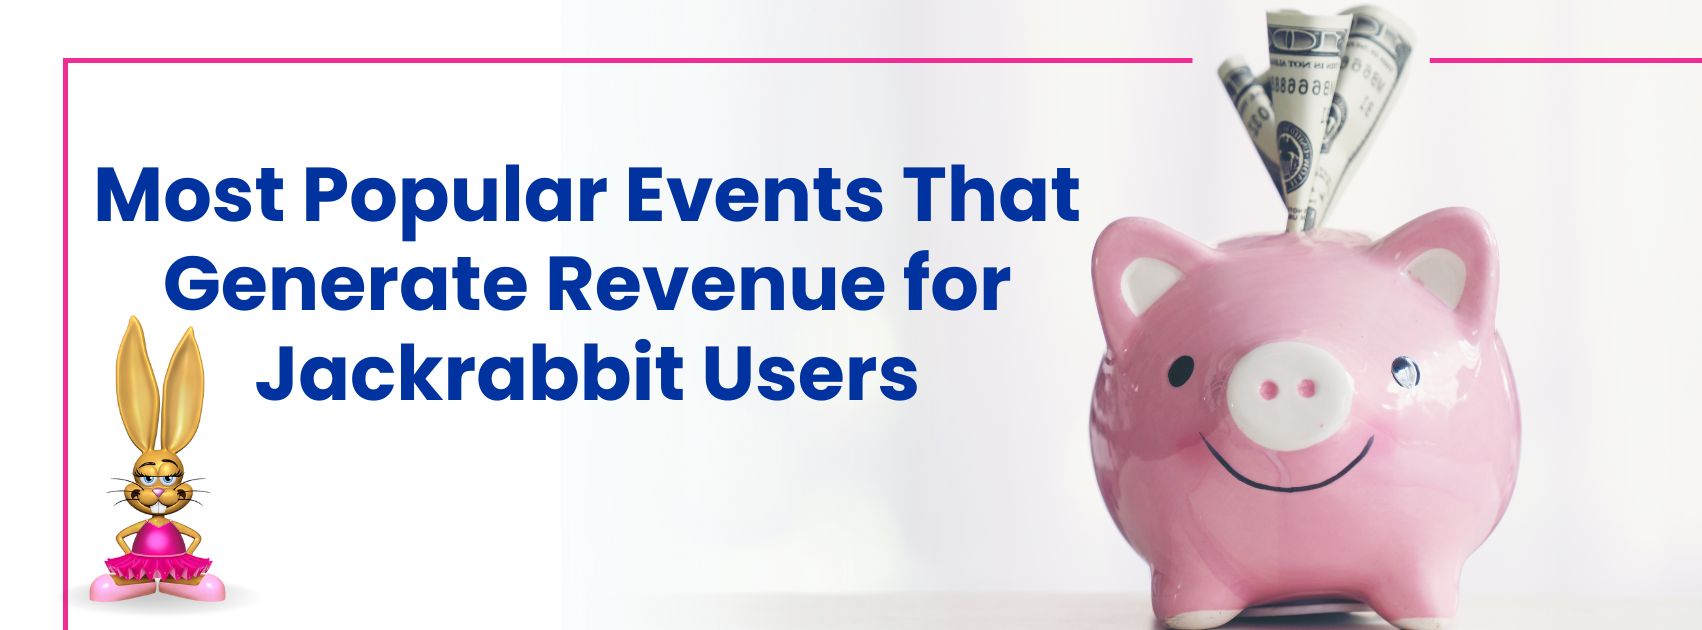 Popular-events-that-generate-revenue-for-jackrabbit-users